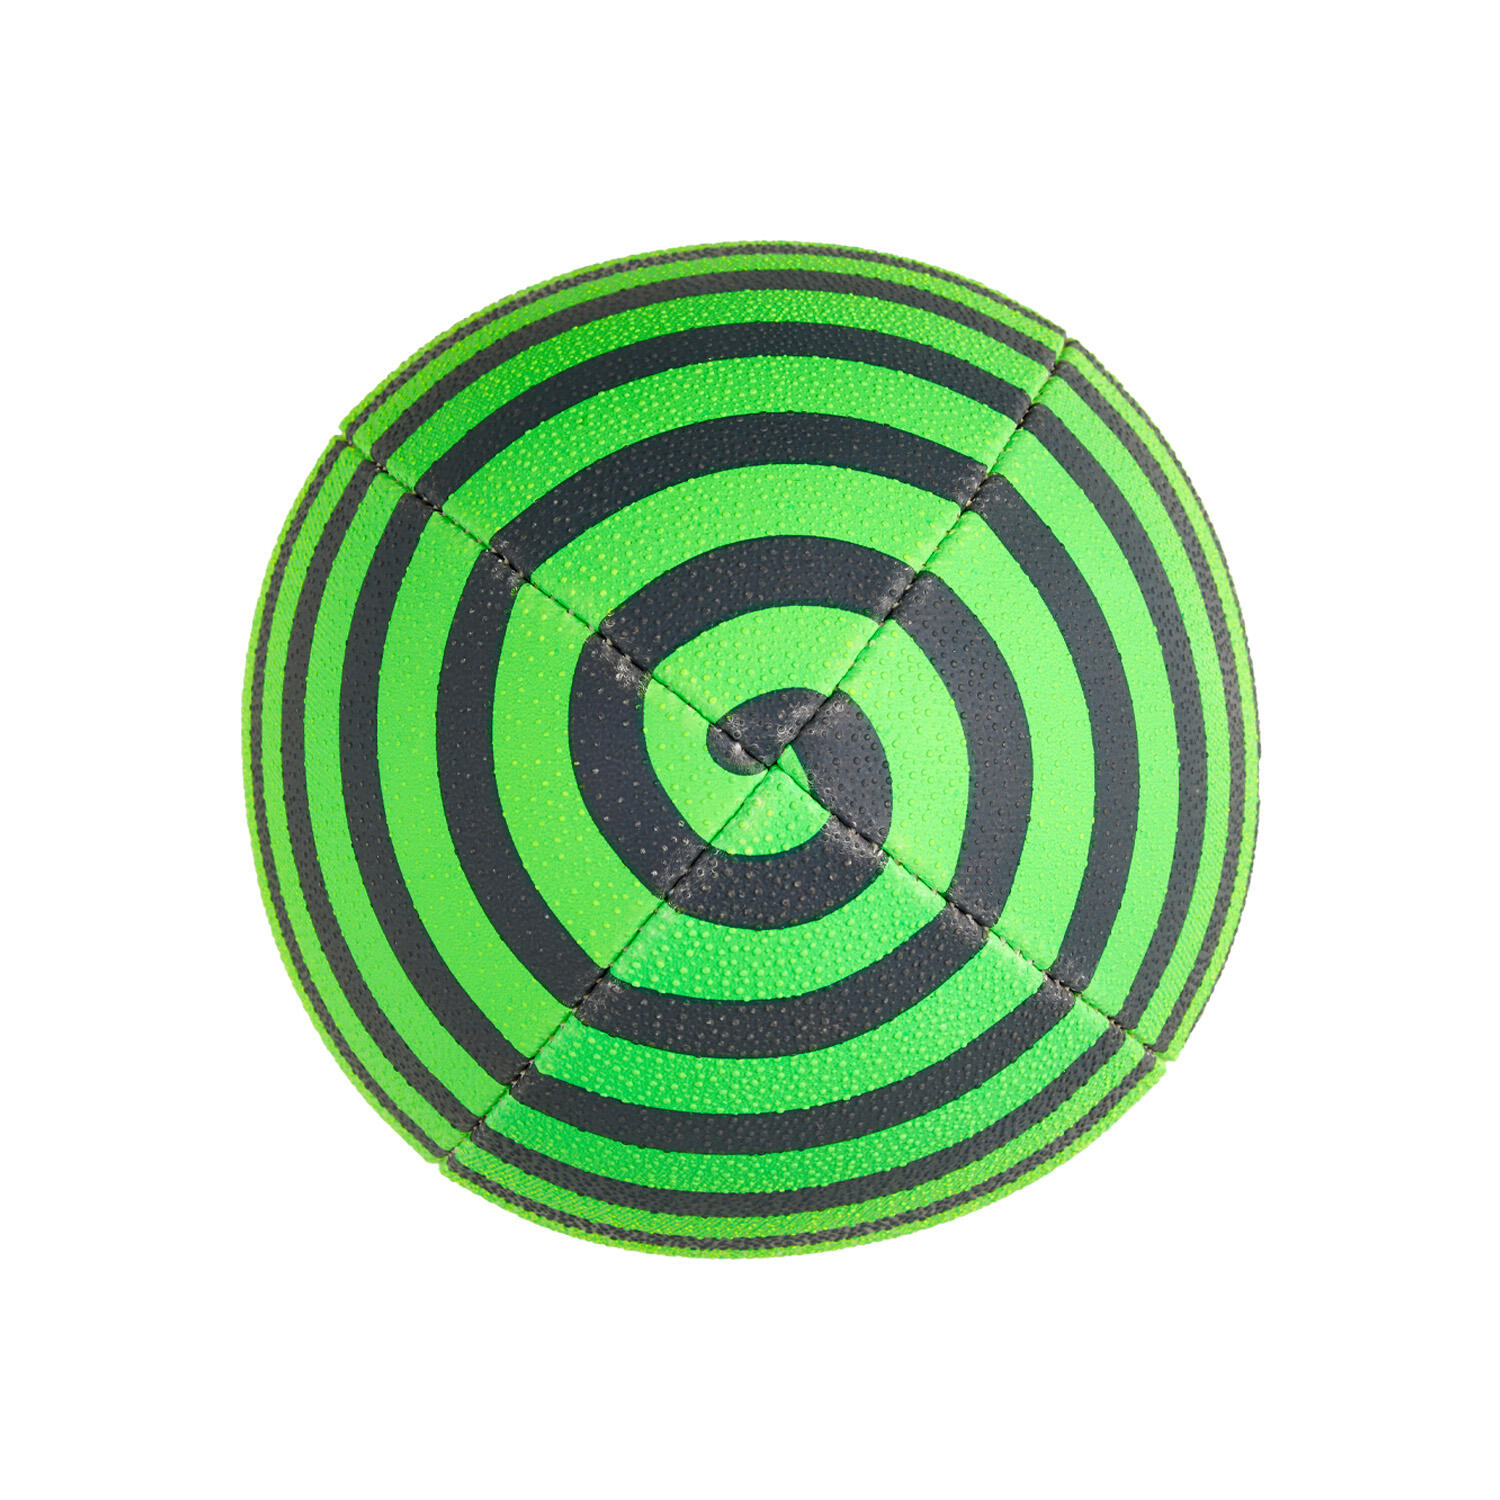 Ram Rugby Ball - Squad - Trainer - (Size 4) - Spiral 5/6